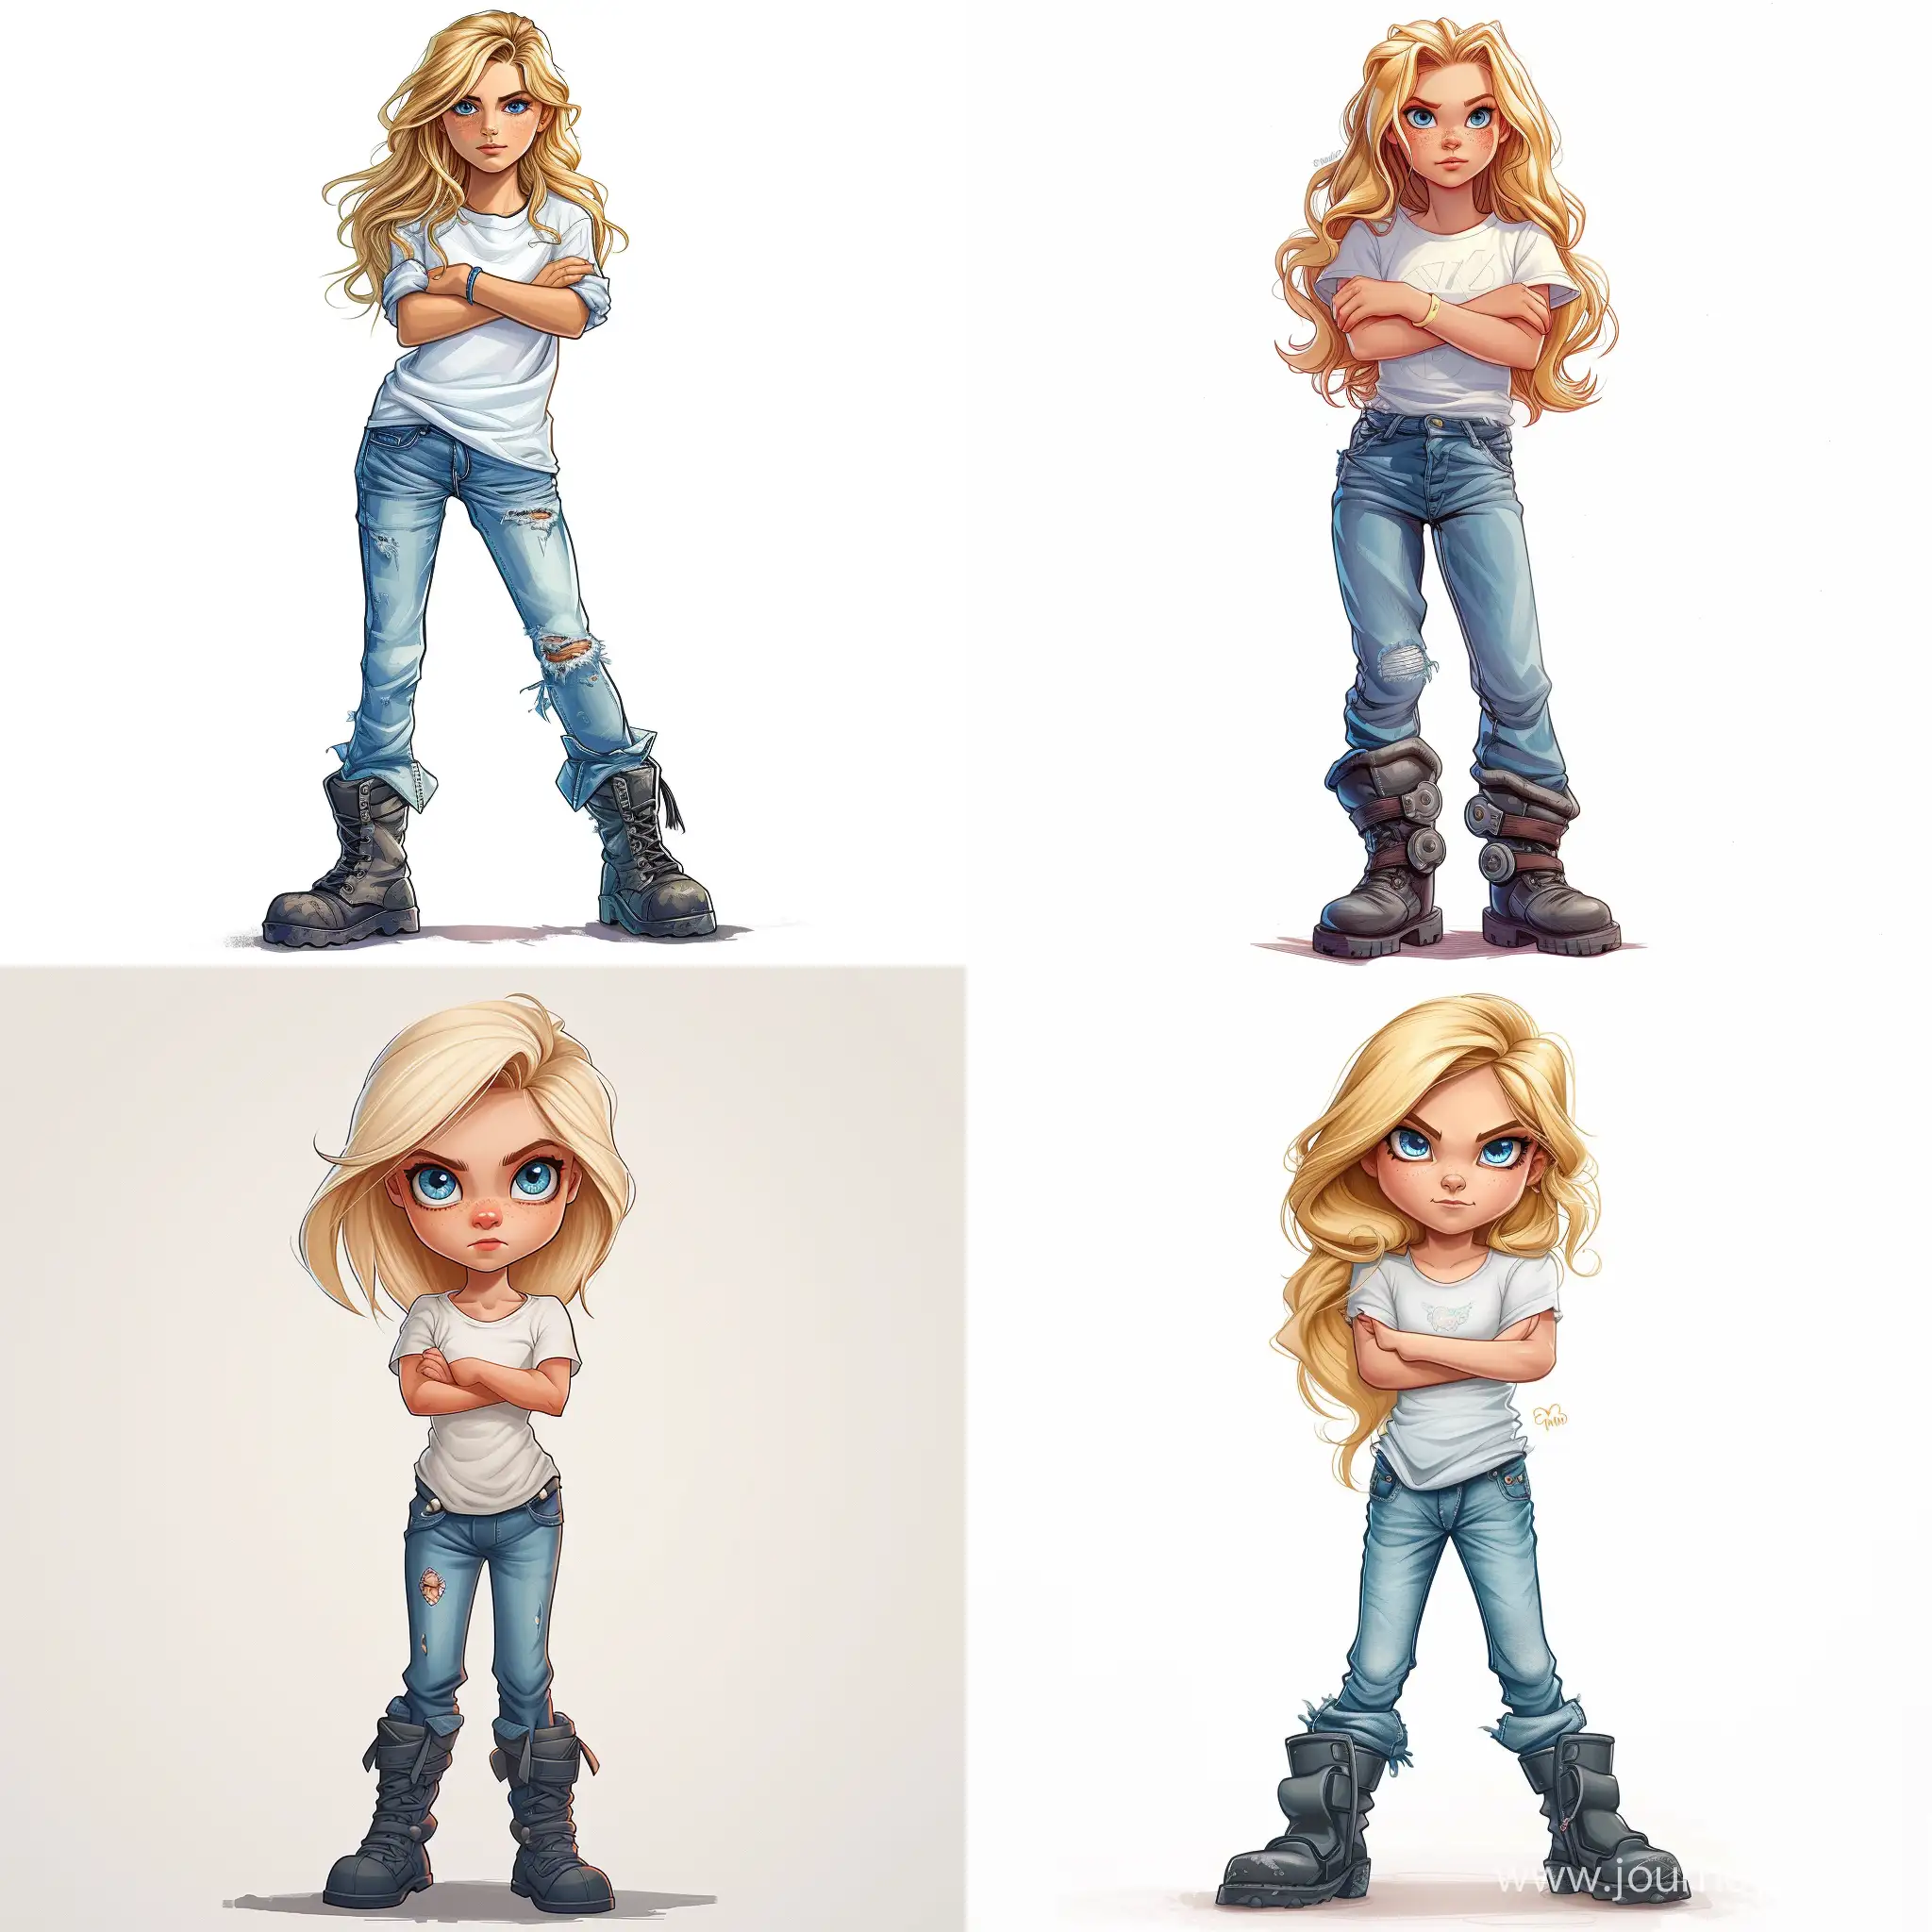 Beautiful girl, blonde hair, blue eyes, white skin, teenager, 15 years old, jeans, jeans, white T-shirt, heavy boots, cool, folded arms, high quality, high detail, cartoon art